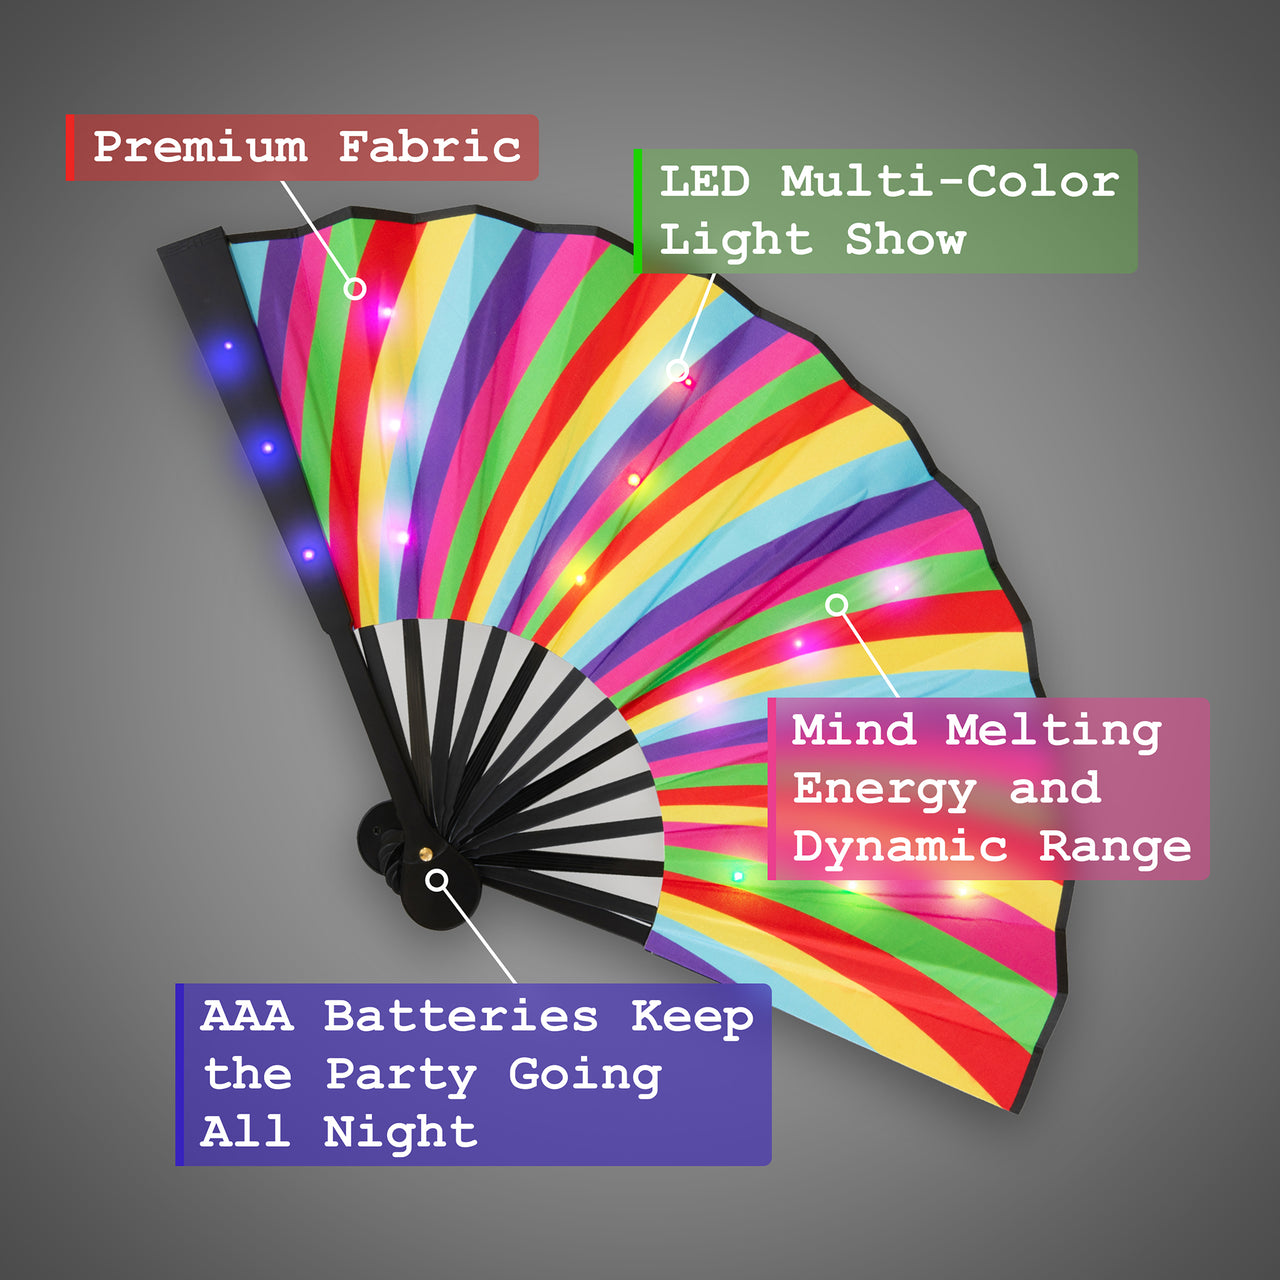 LED Hand Fan - "Rainbow Candy" Celebrate Love with our Rainbow Foldable Hand Fan